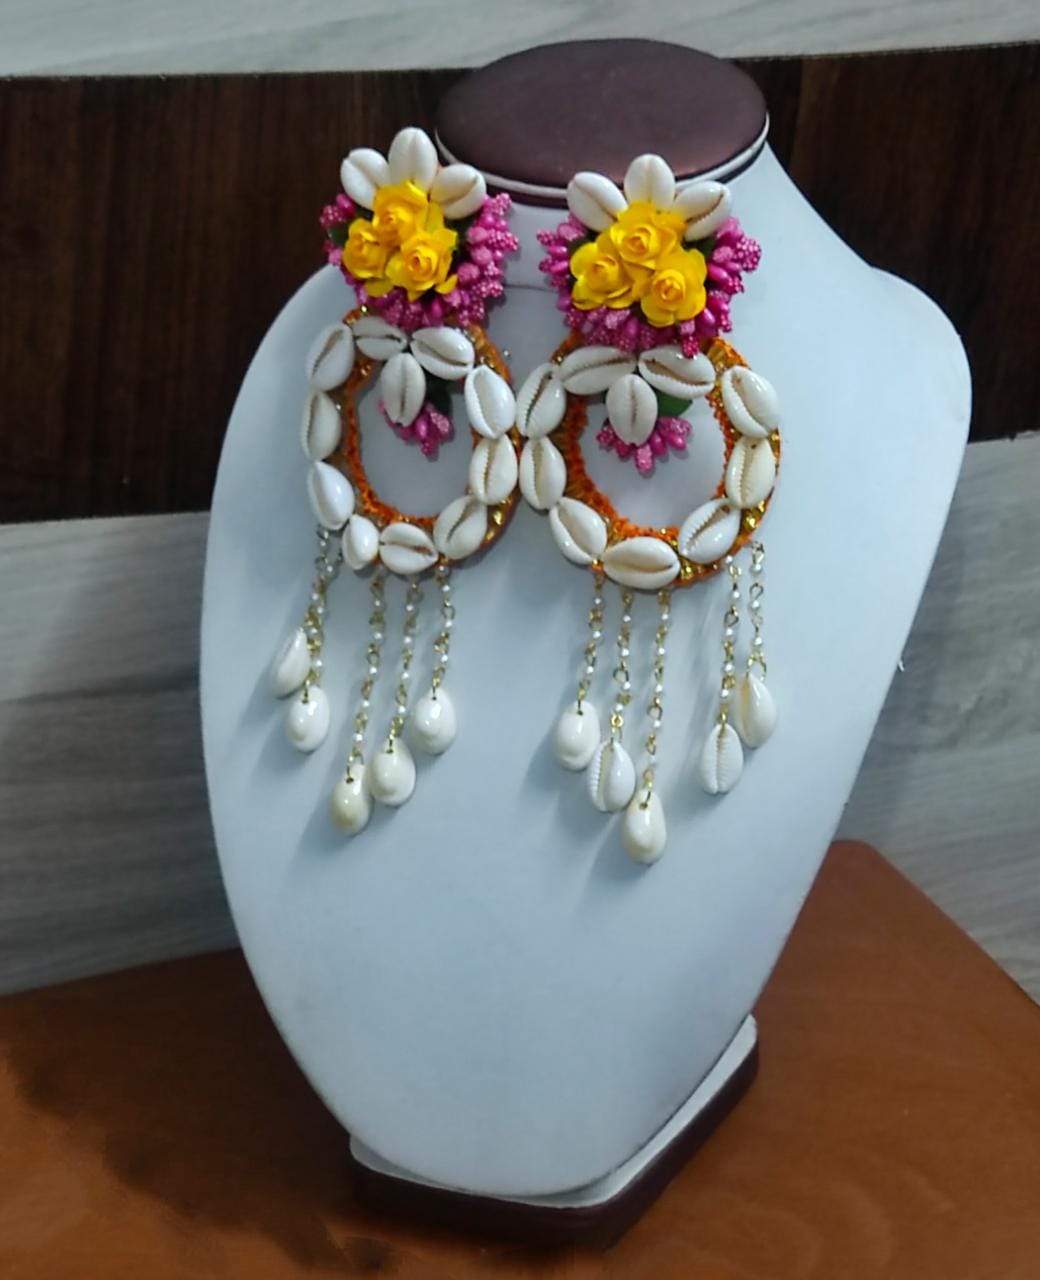 LAMANSH Flower Jewellery Yellow Pink / Standard / Shells 🐚 Style Lamansh® Floral Jewellery Set 🌺 / Shell Collection for Haldi with Payal Anklets / Floral Set